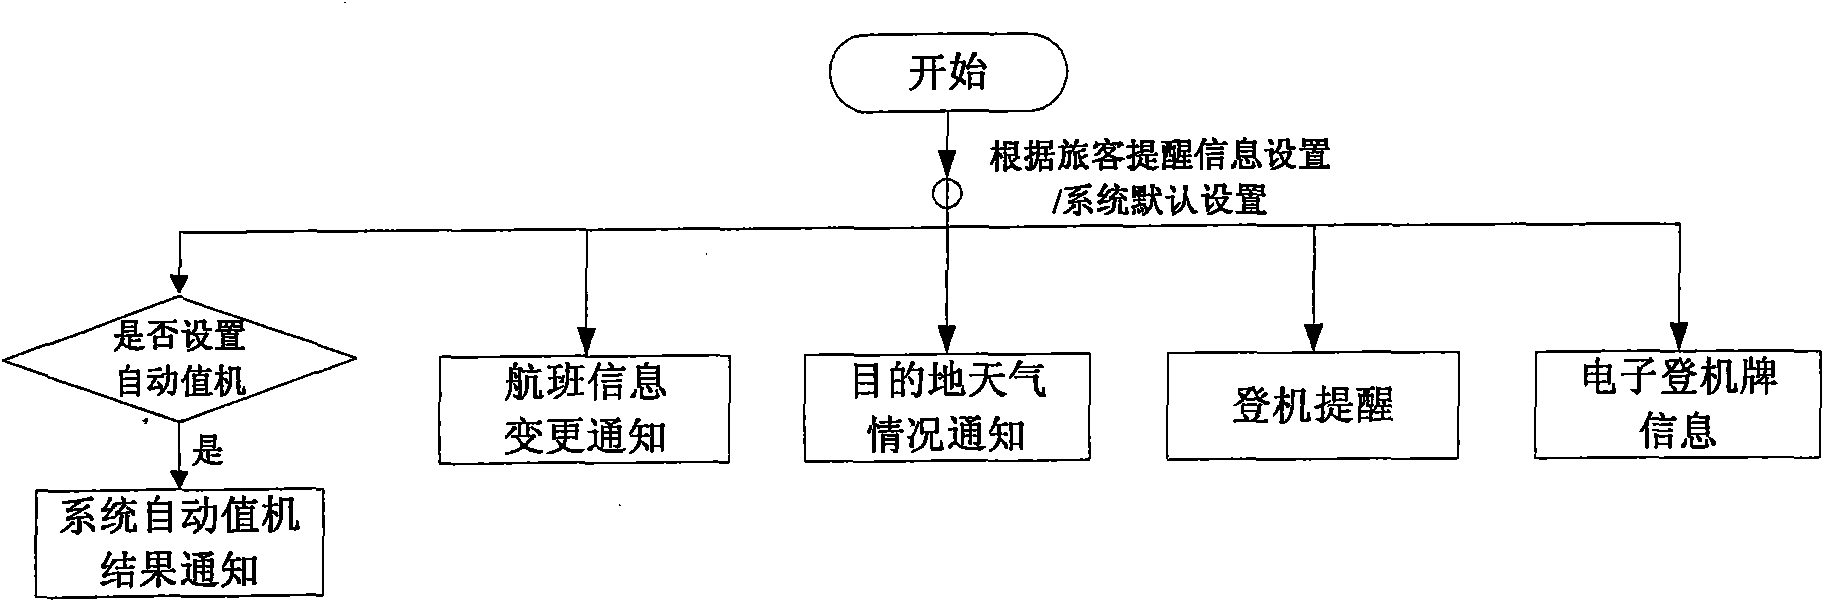 Airline passenger operator system based on second generation resident identification card